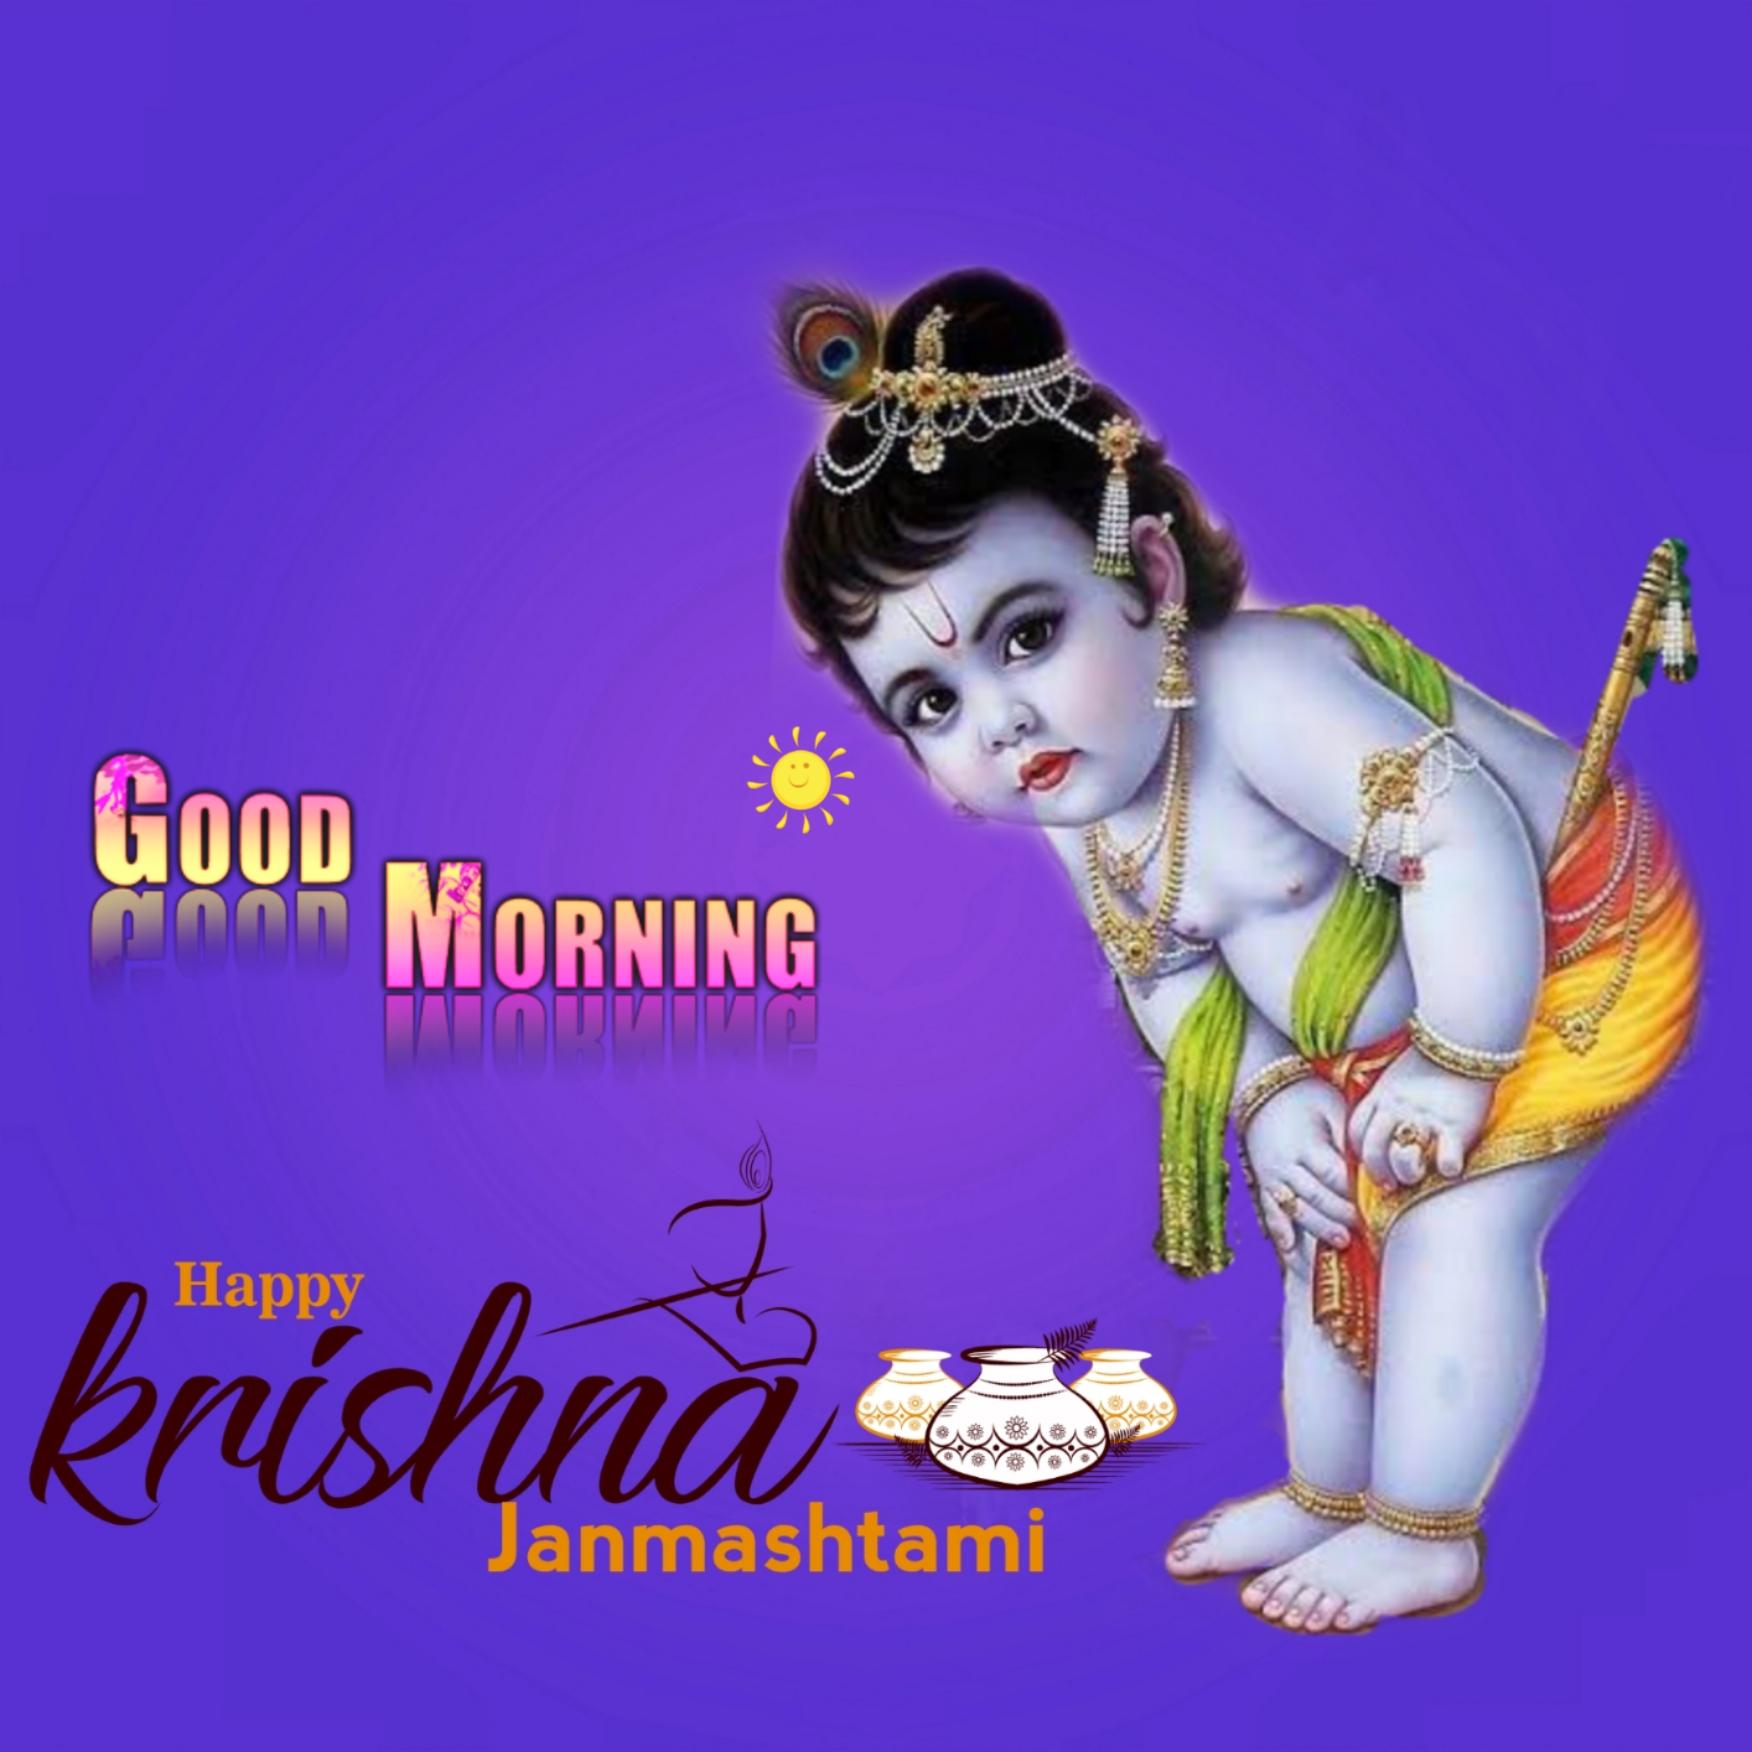 Full 4K Collection of Amazing Small Krishna Images - Top 999+